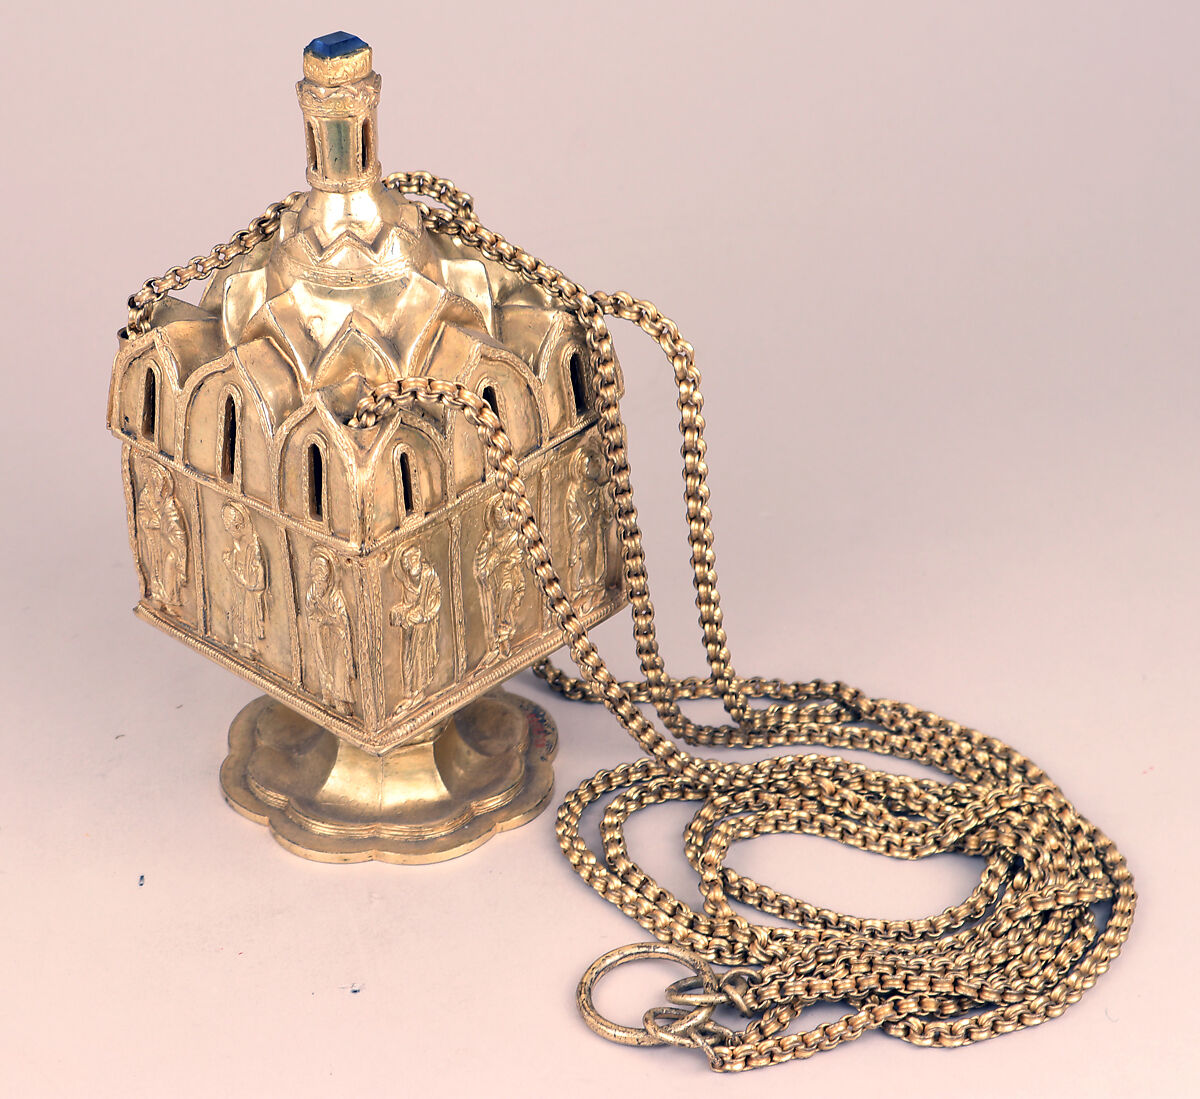 Censer with chain, Silver on base metal, British, after Russian original 